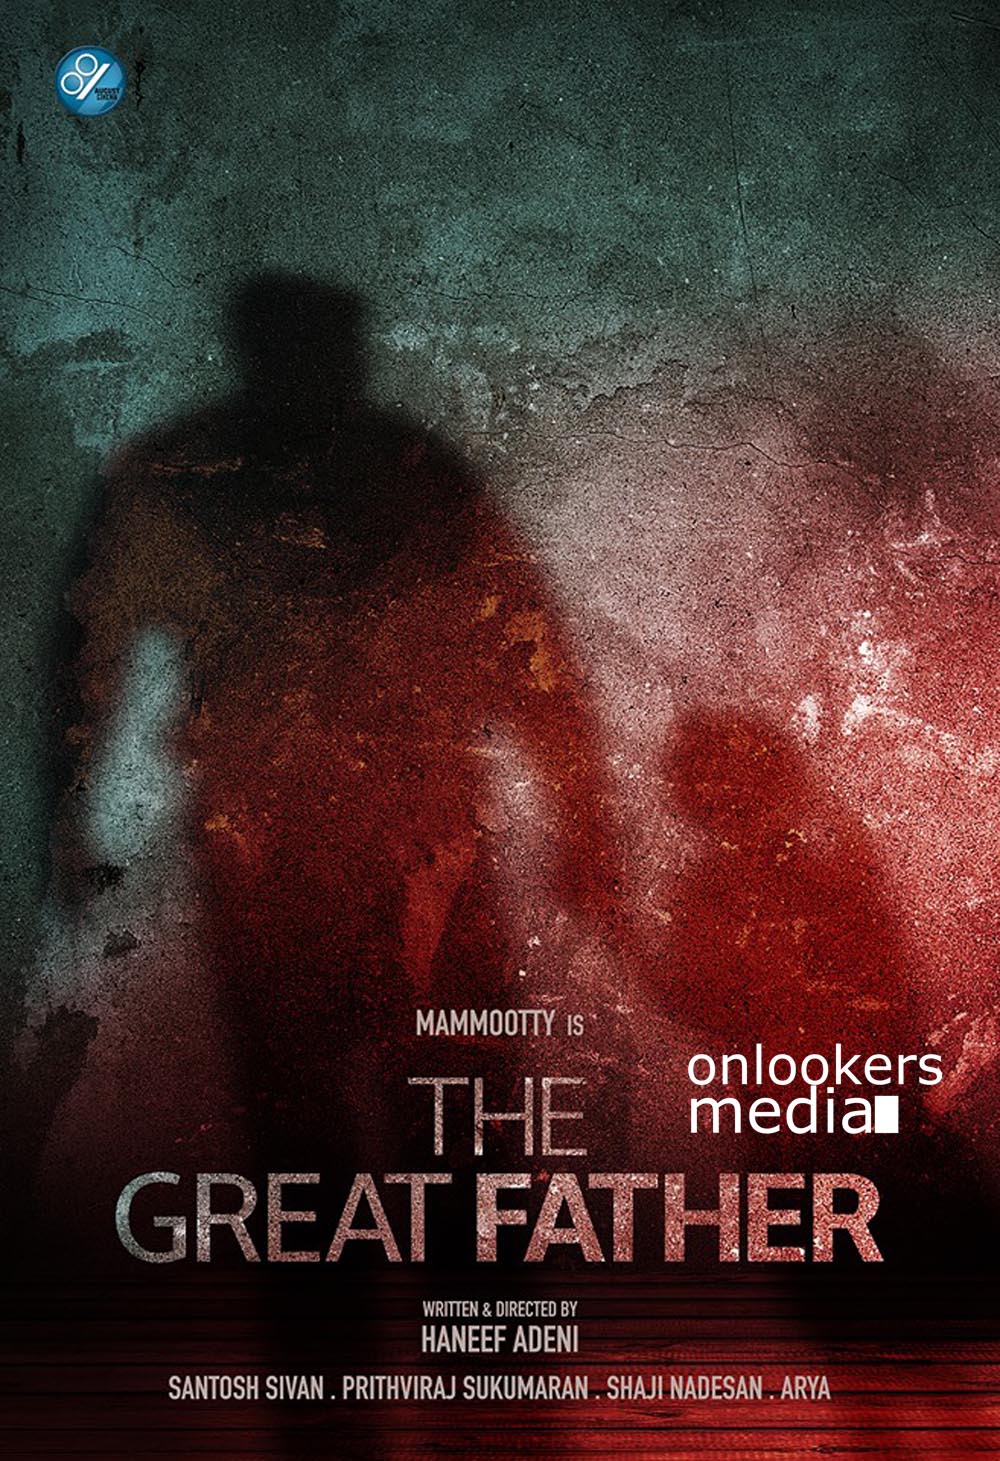 the great father malayalam movie, the great father poster photos images, mammootty next movie, megastar mammootty latest photos, mammootty new look, 